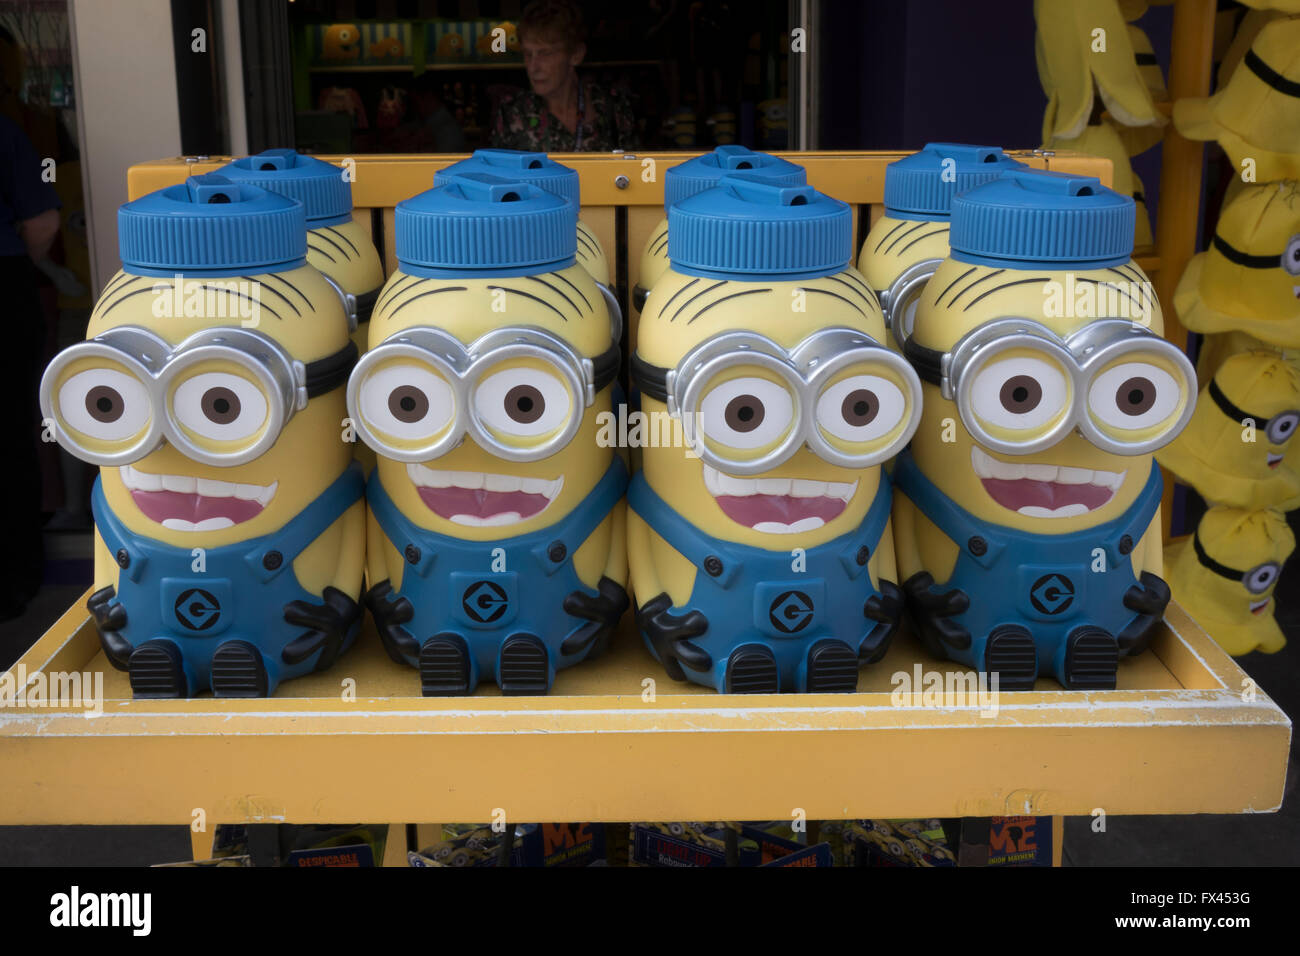 https://c8.alamy.com/comp/FX453G/dave-the-minion-souvenir-water-bottles-on-sale-in-a-retail-store-at-FX453G.jpg